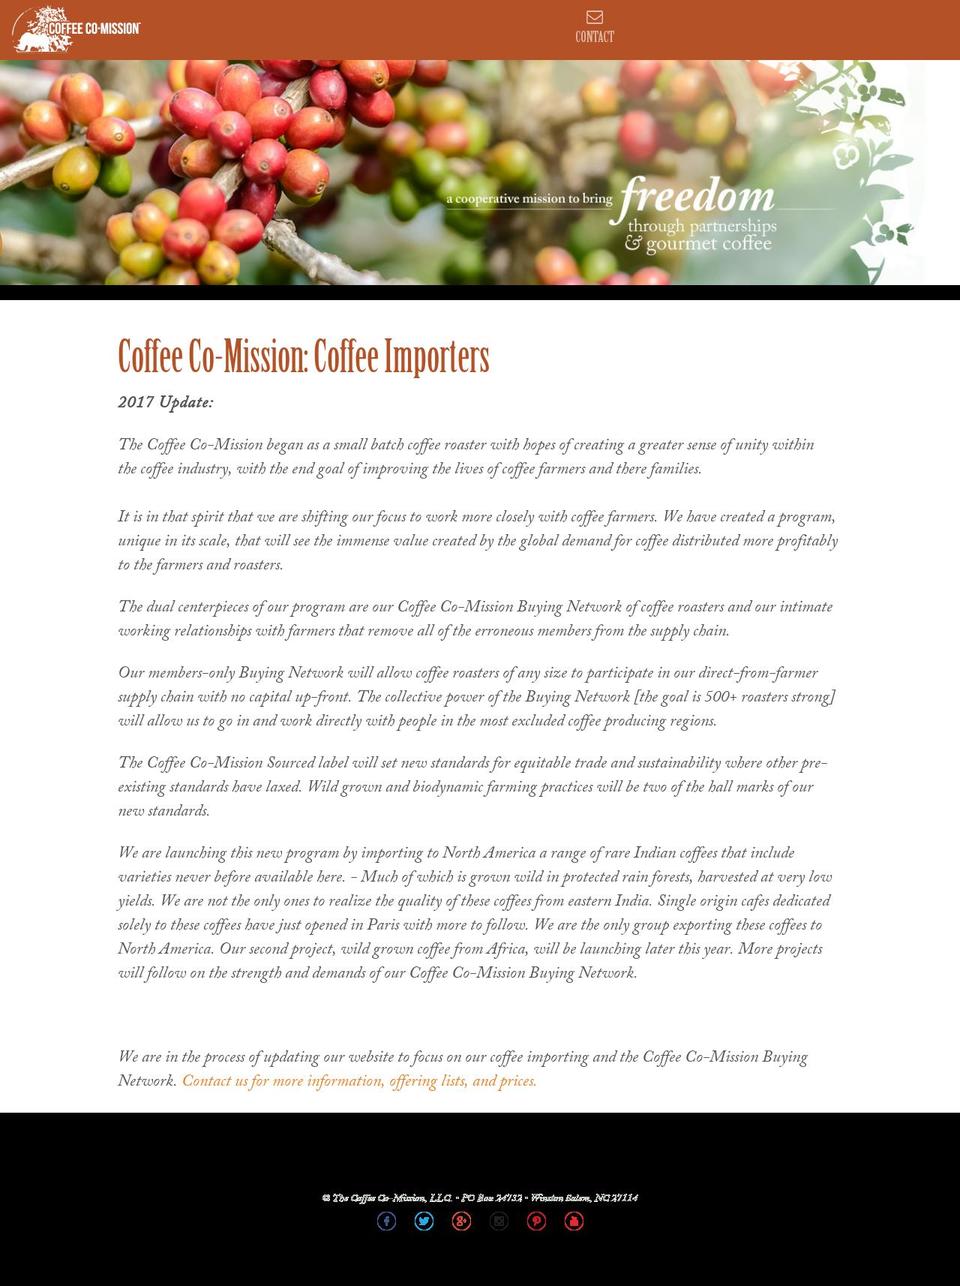 Coffee Shopify theme site example coffeecomission.com